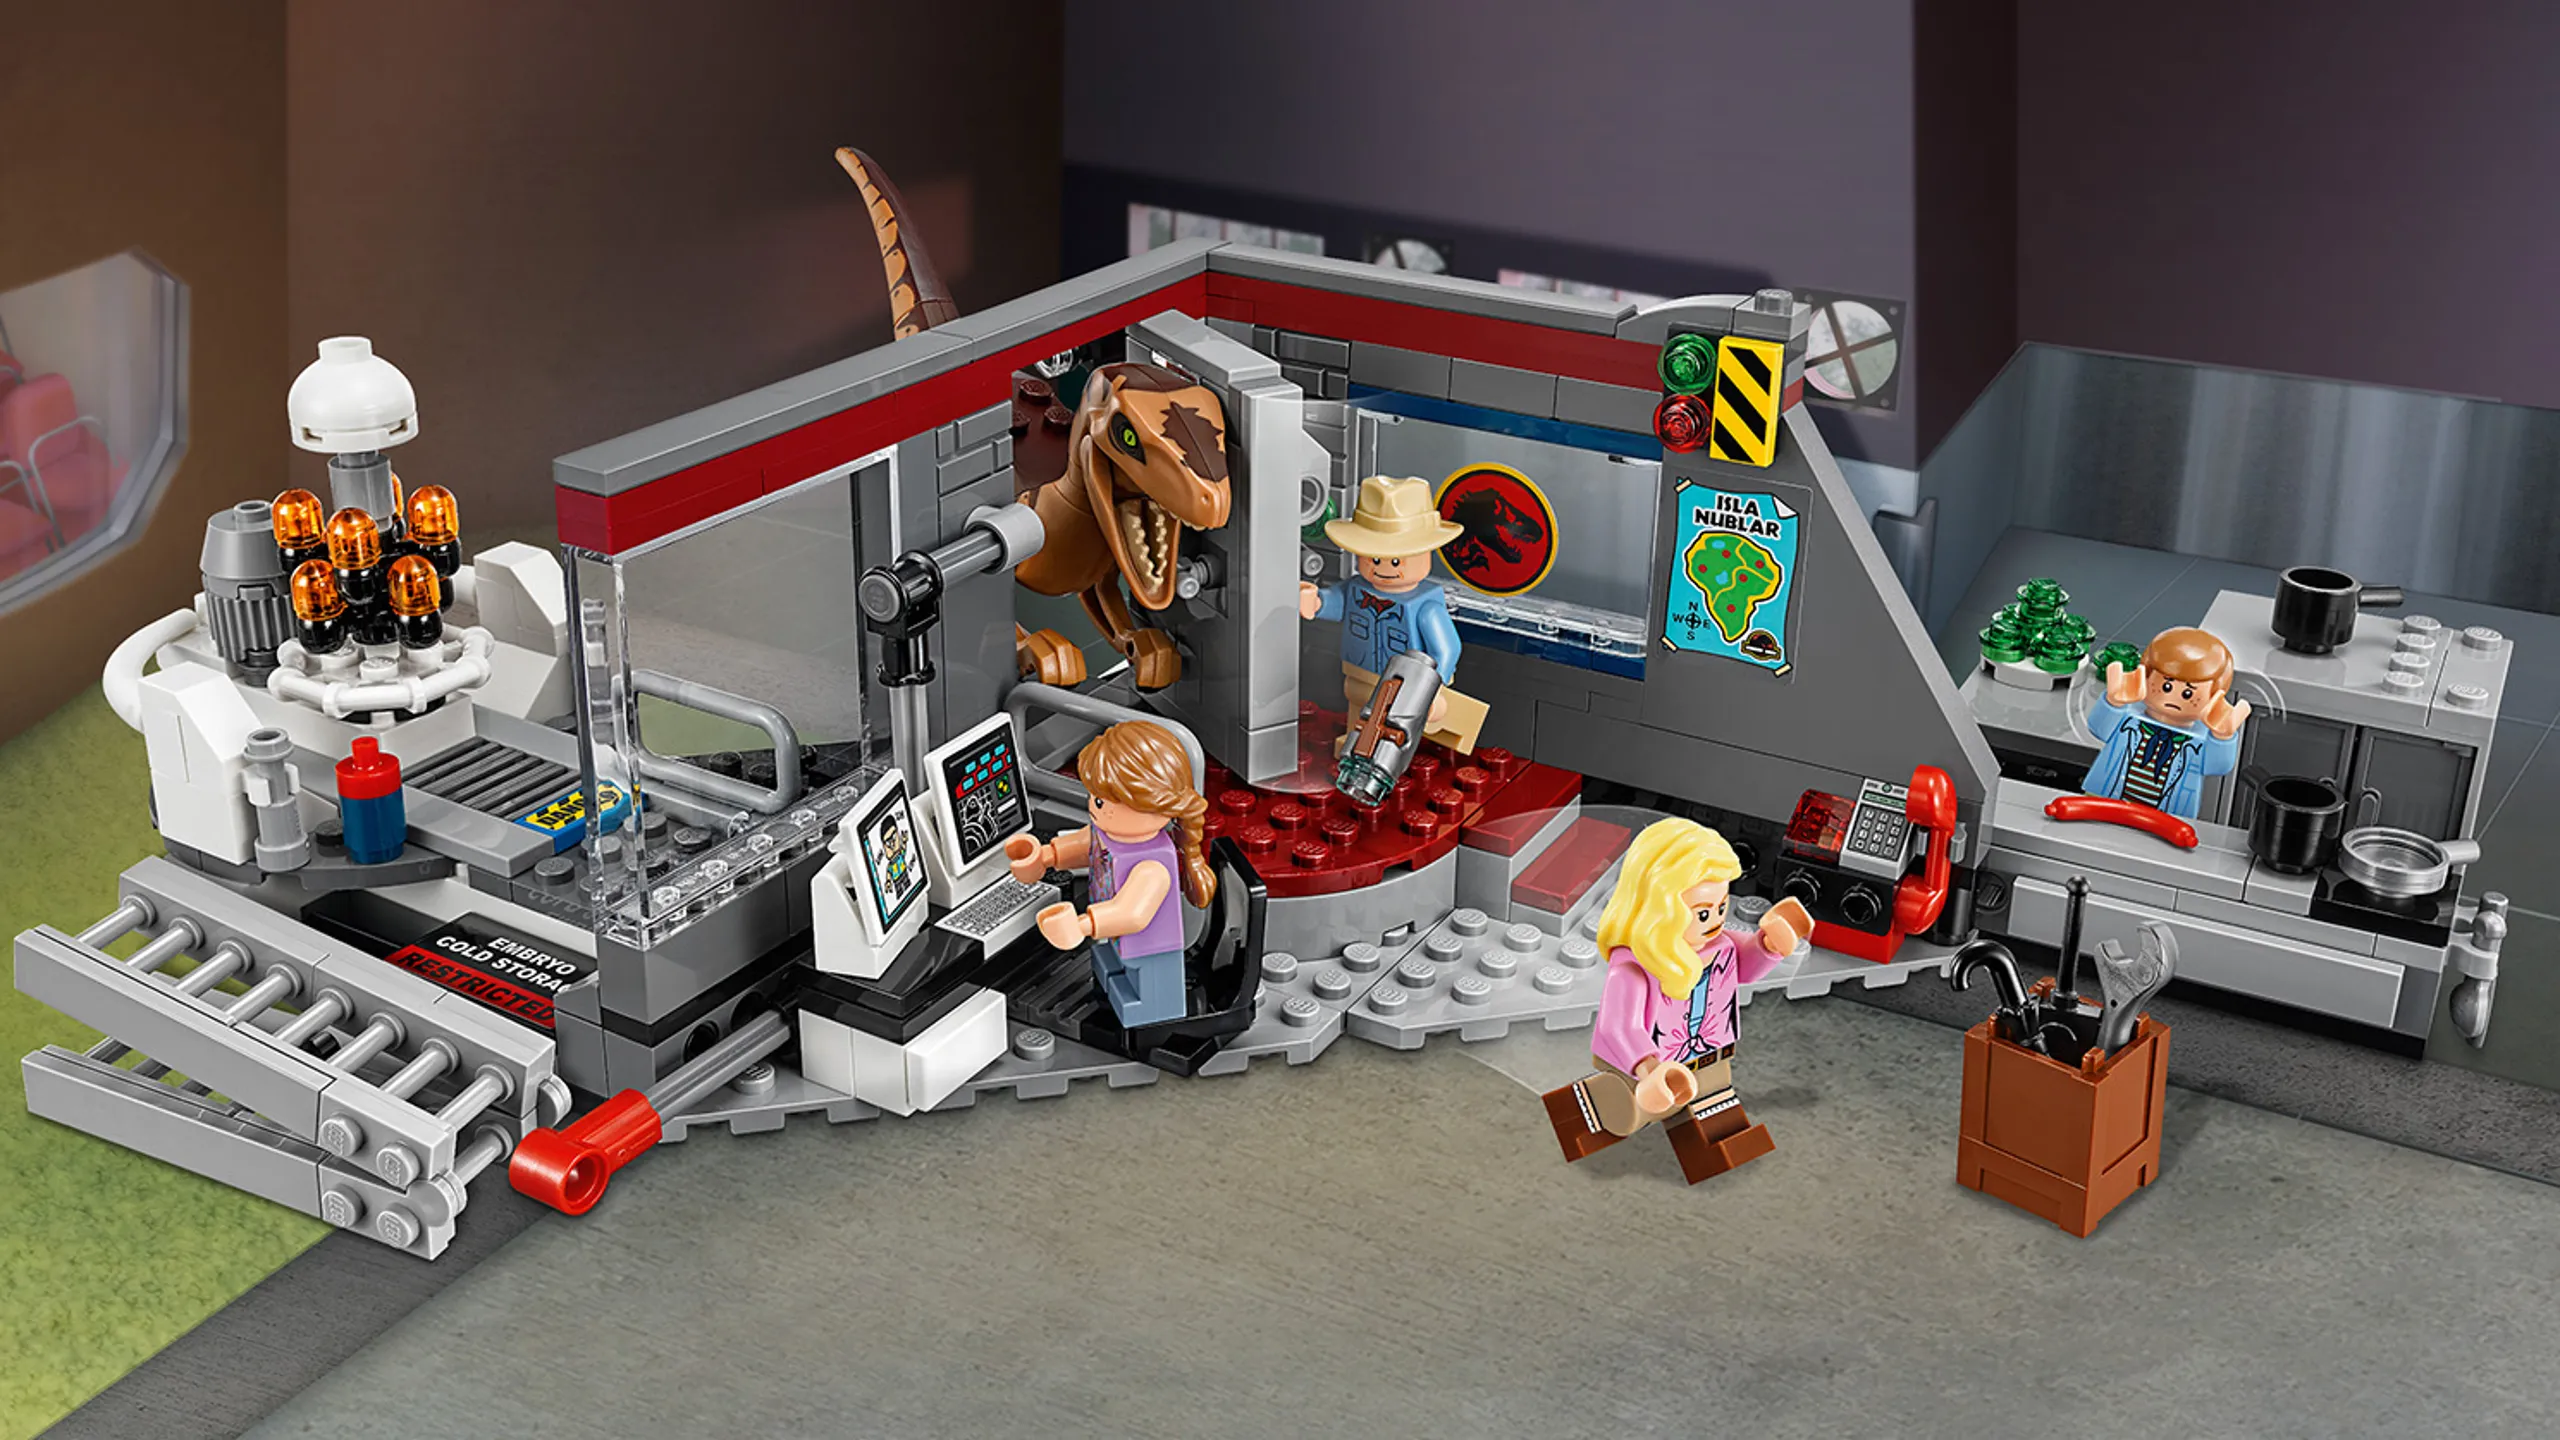 LEGO Jurassic World - 75932 Jurassic Park Velociraptor Chase - The scientists and explorers are on base reading on the computer and preparing lunch when Velociraptor tries to break in!